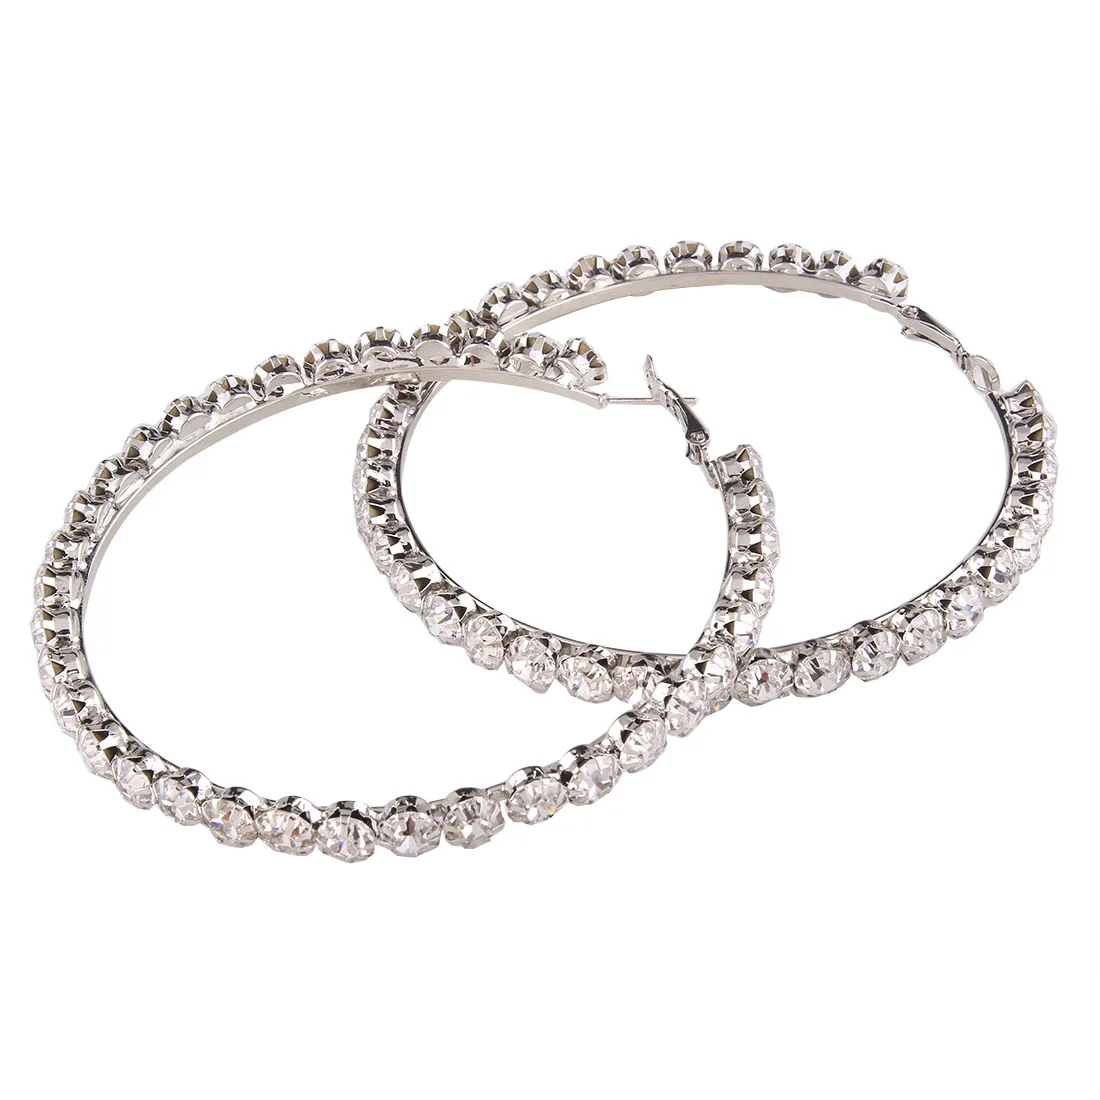 New Trendy Gold Plated Circle Large Rhinestone Hoop Earrings For Women